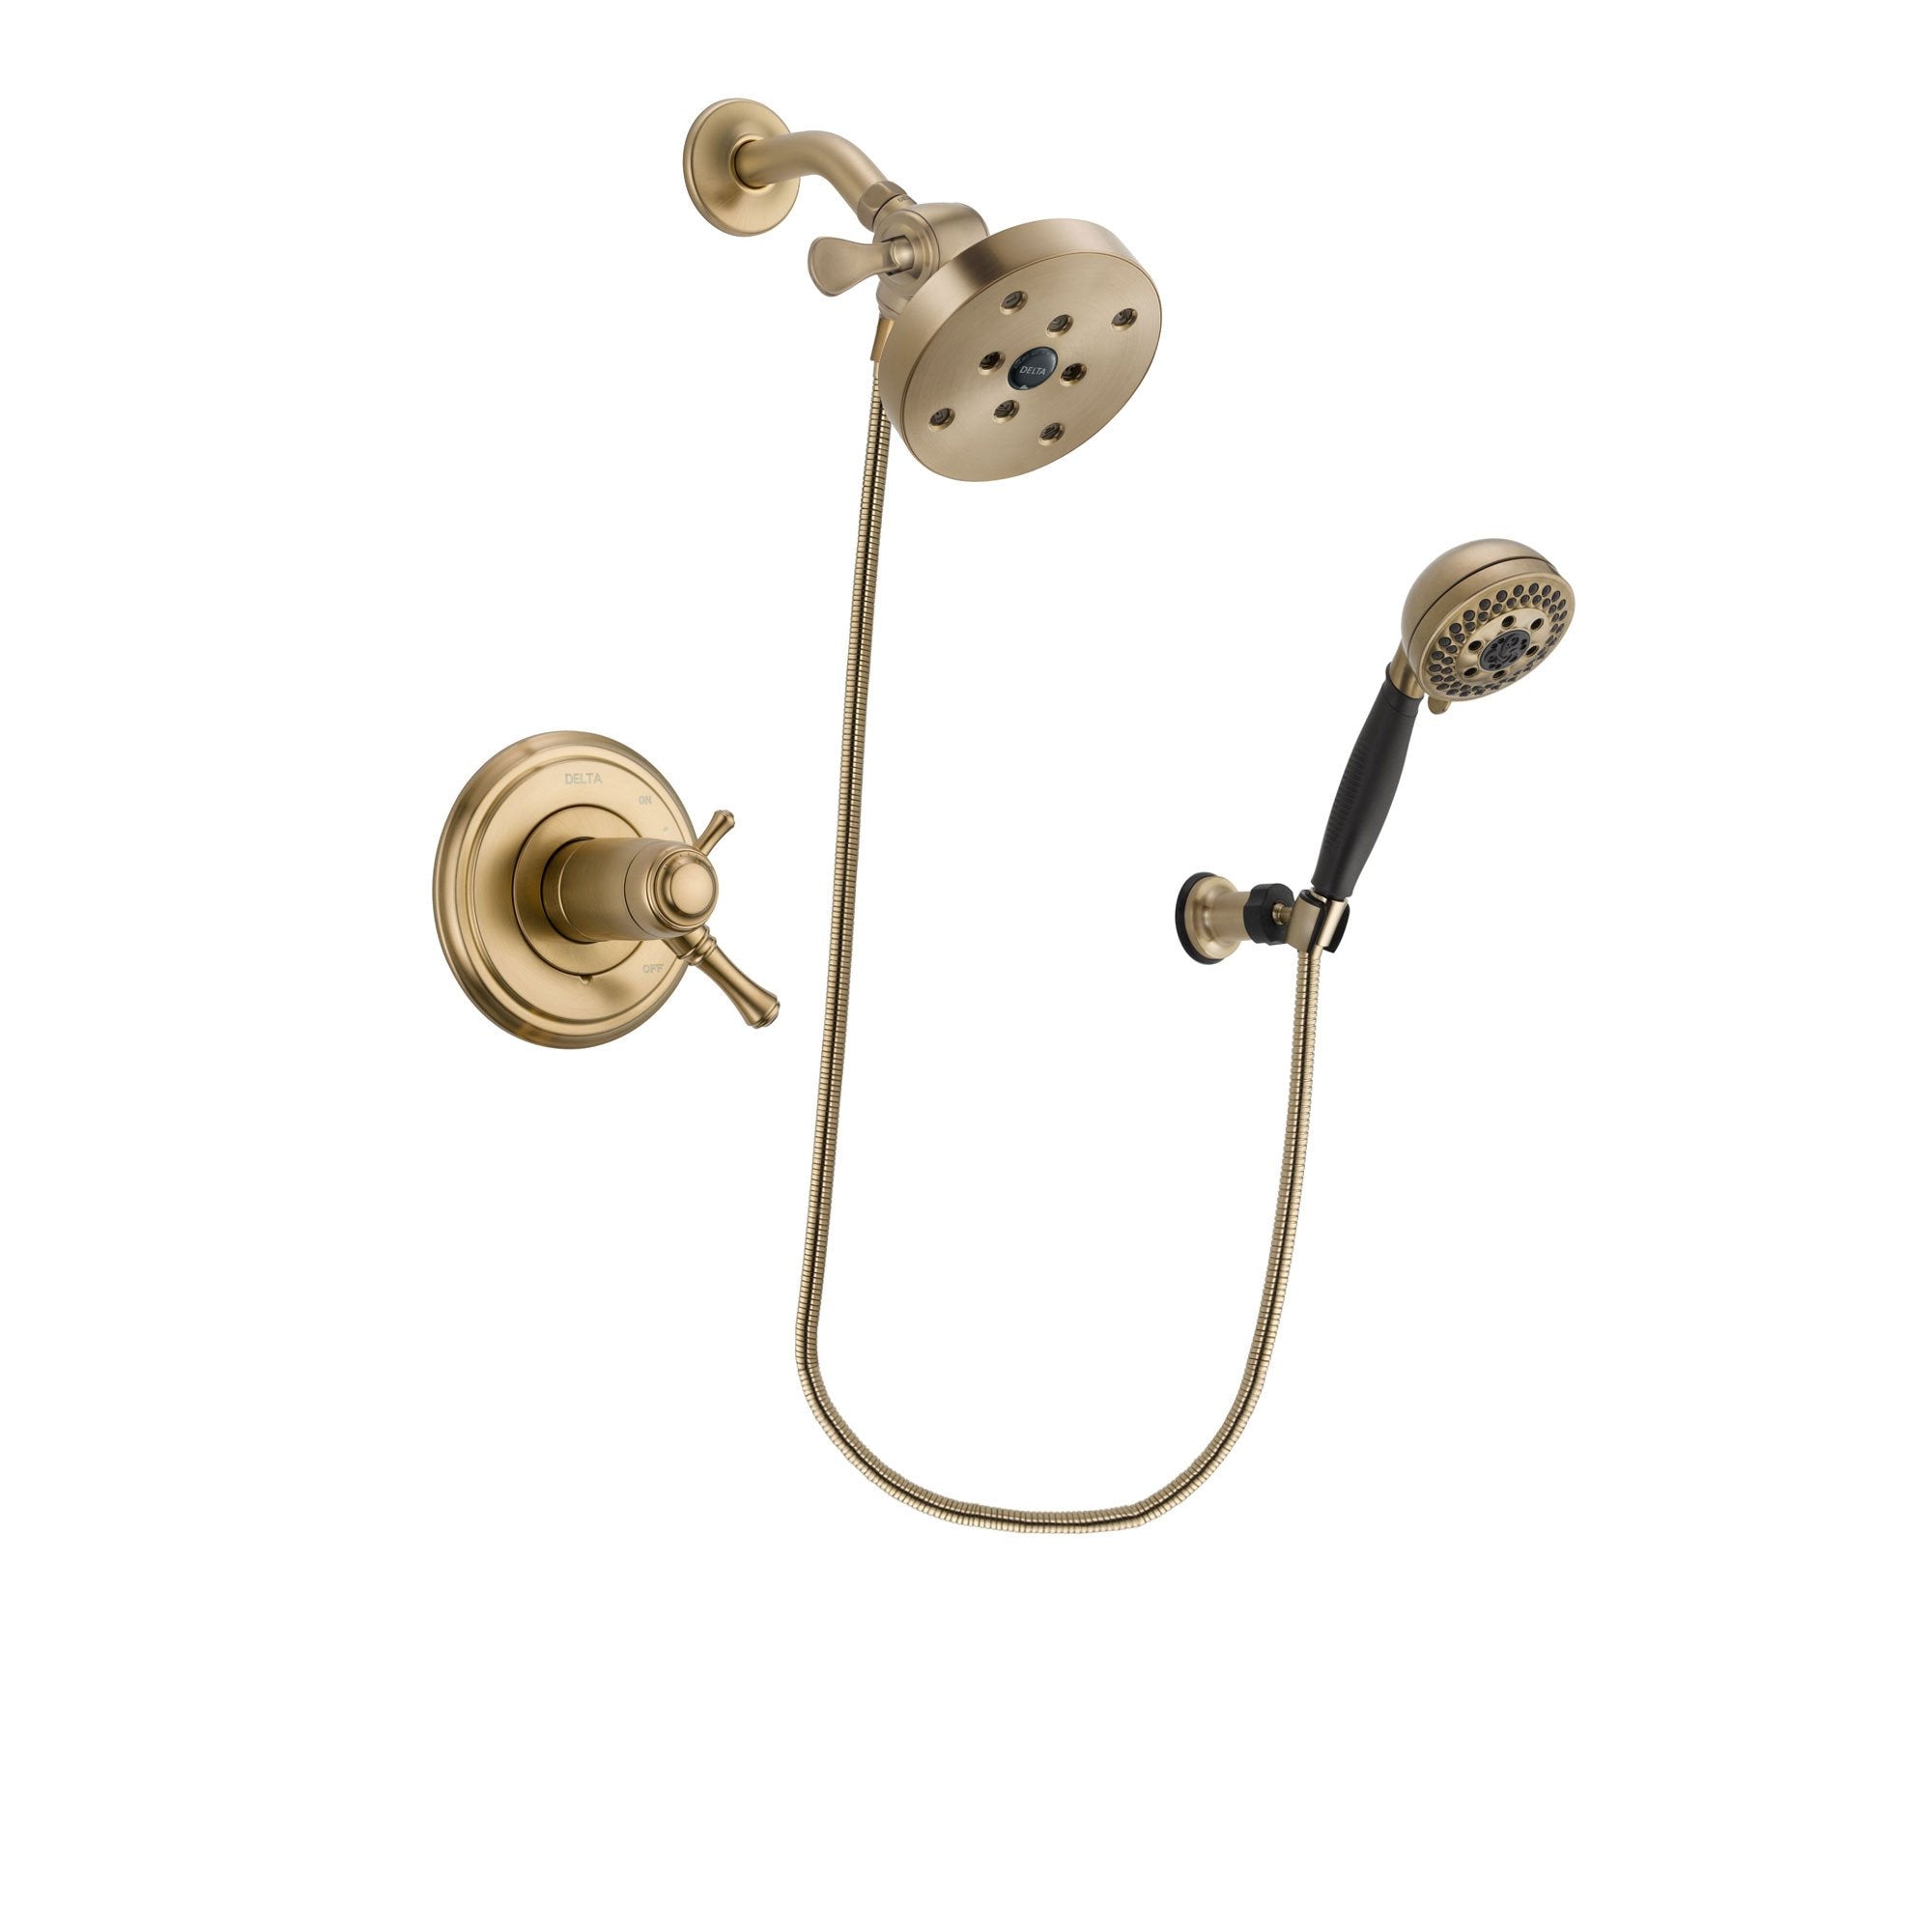 Delta Cassidy Champagne Bronze Finish Thermostatic Shower Faucet System Package with 5-1/2 inch Showerhead and 5-Spray Wall Mount Hand Shower Includes Rough-in Valve DSP3818V